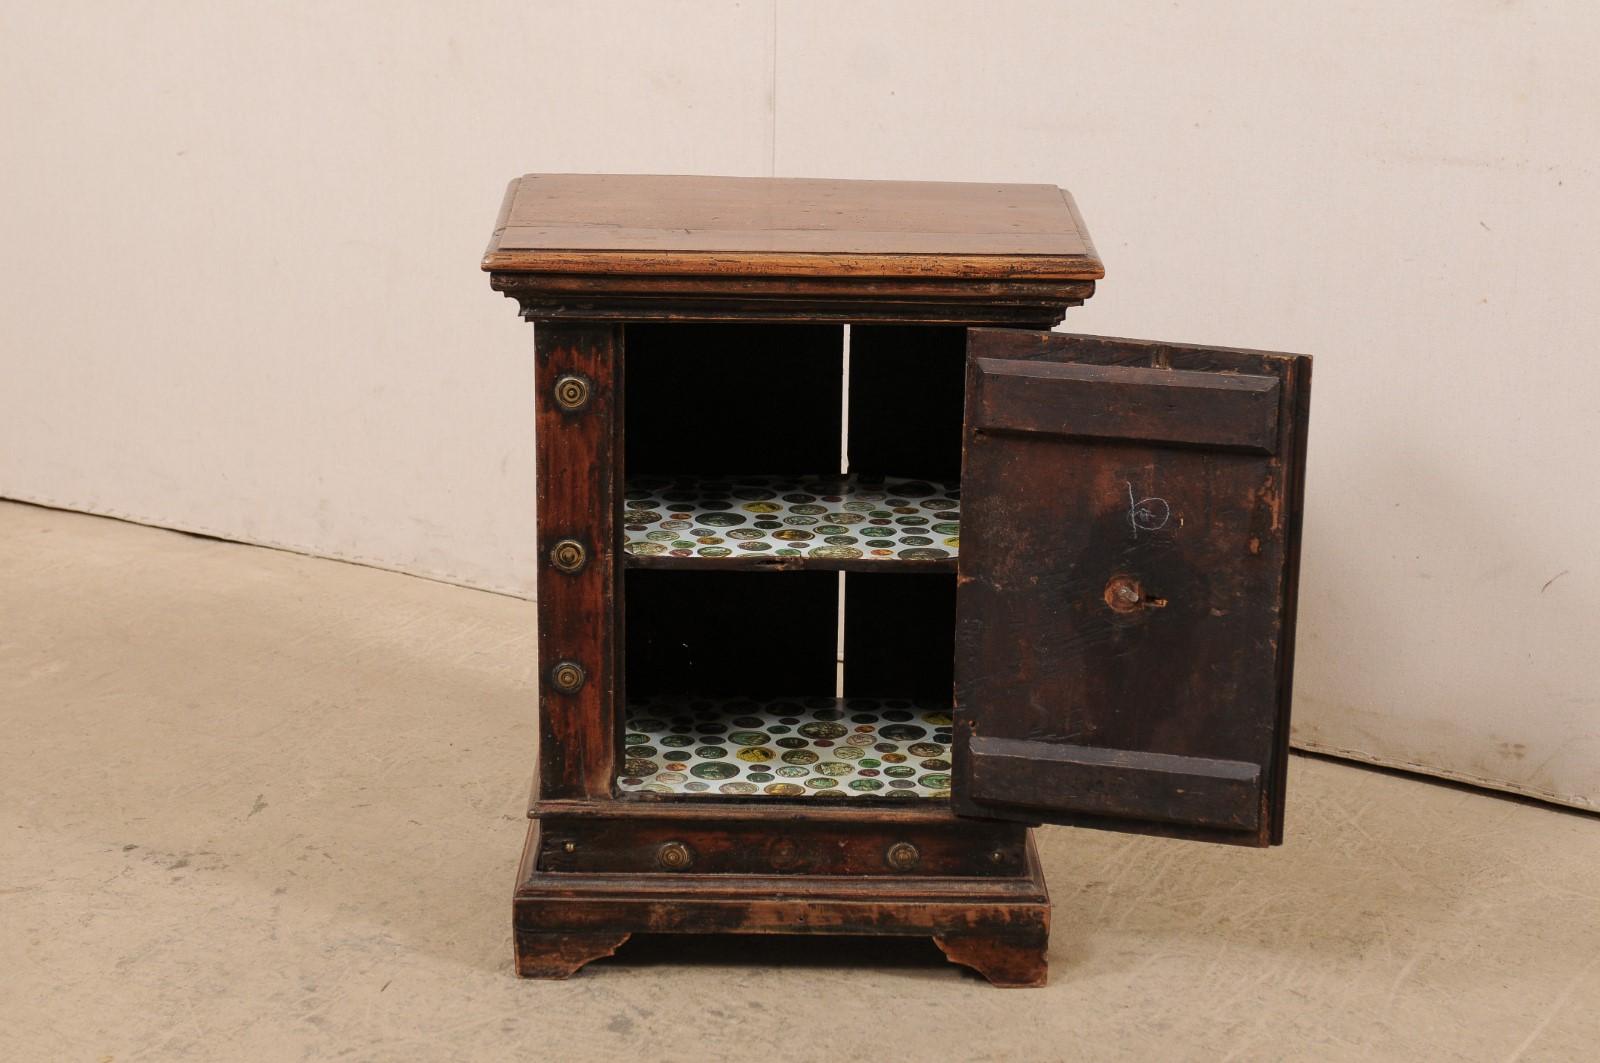 18th Century Italian Small-Sized Cabinet Adorn with Brass Medallion Accents 1